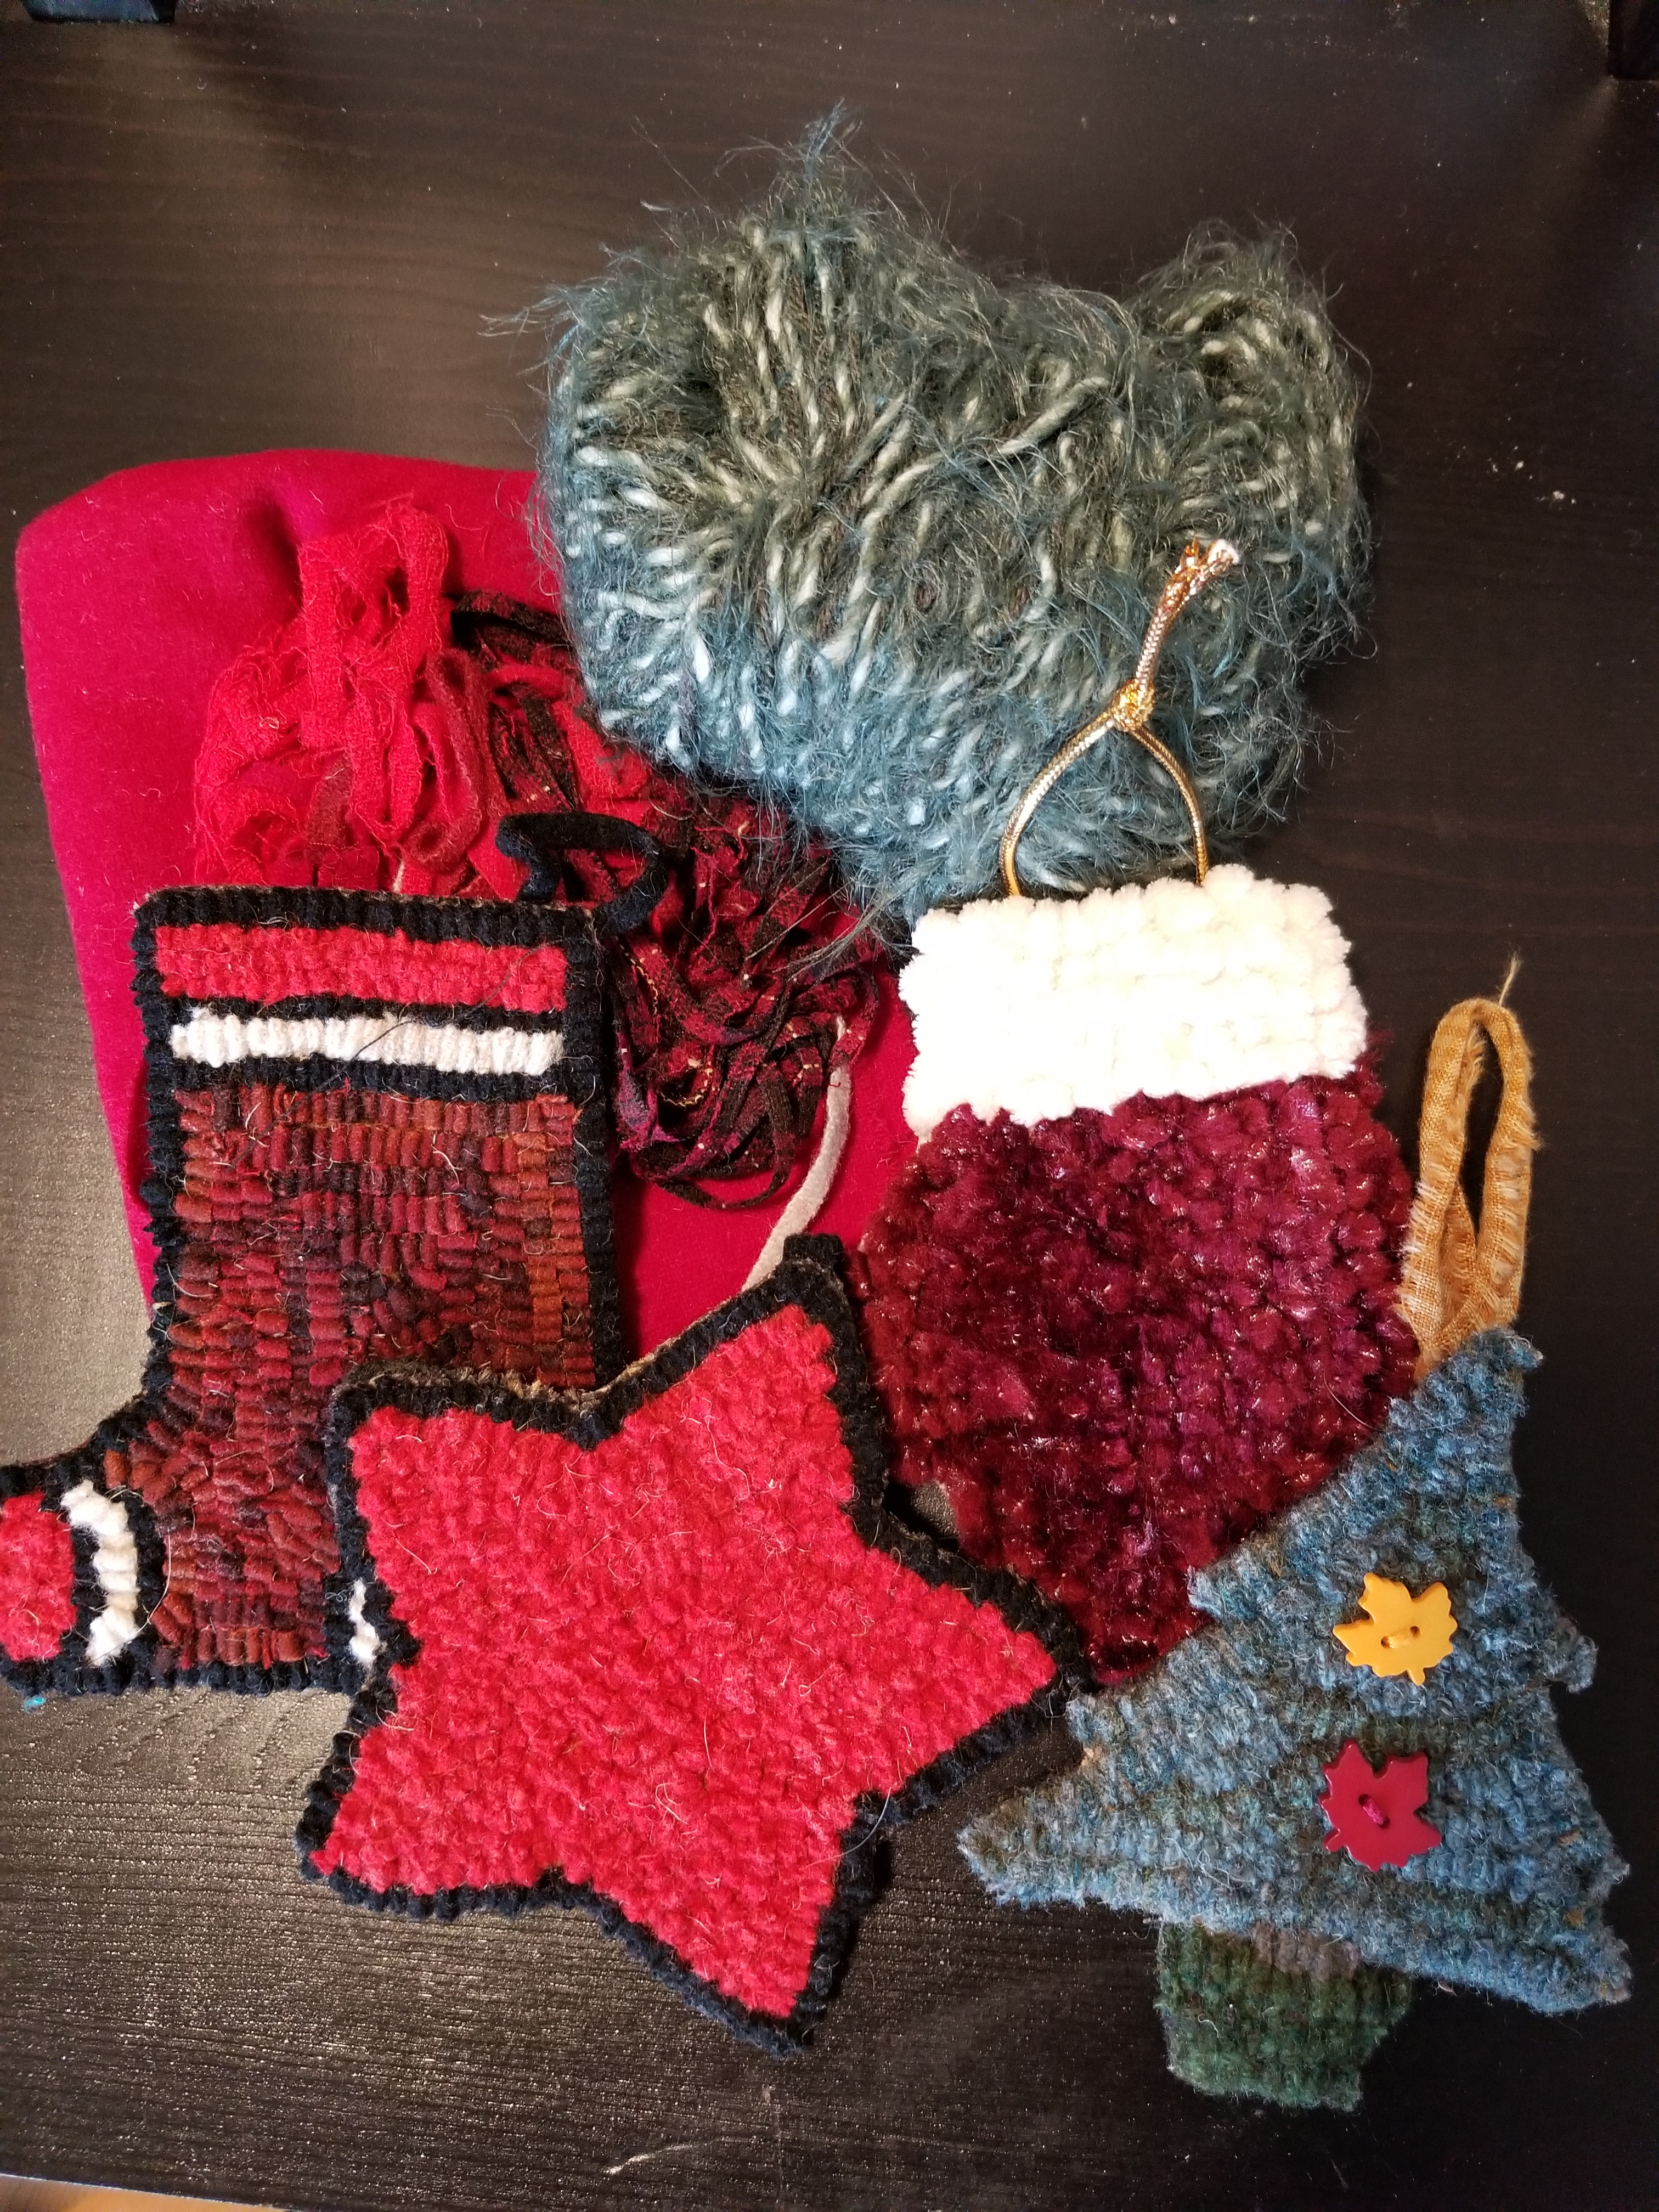 An array of rug-hooked holiday ornaments displayed beneath a ball of blue wool